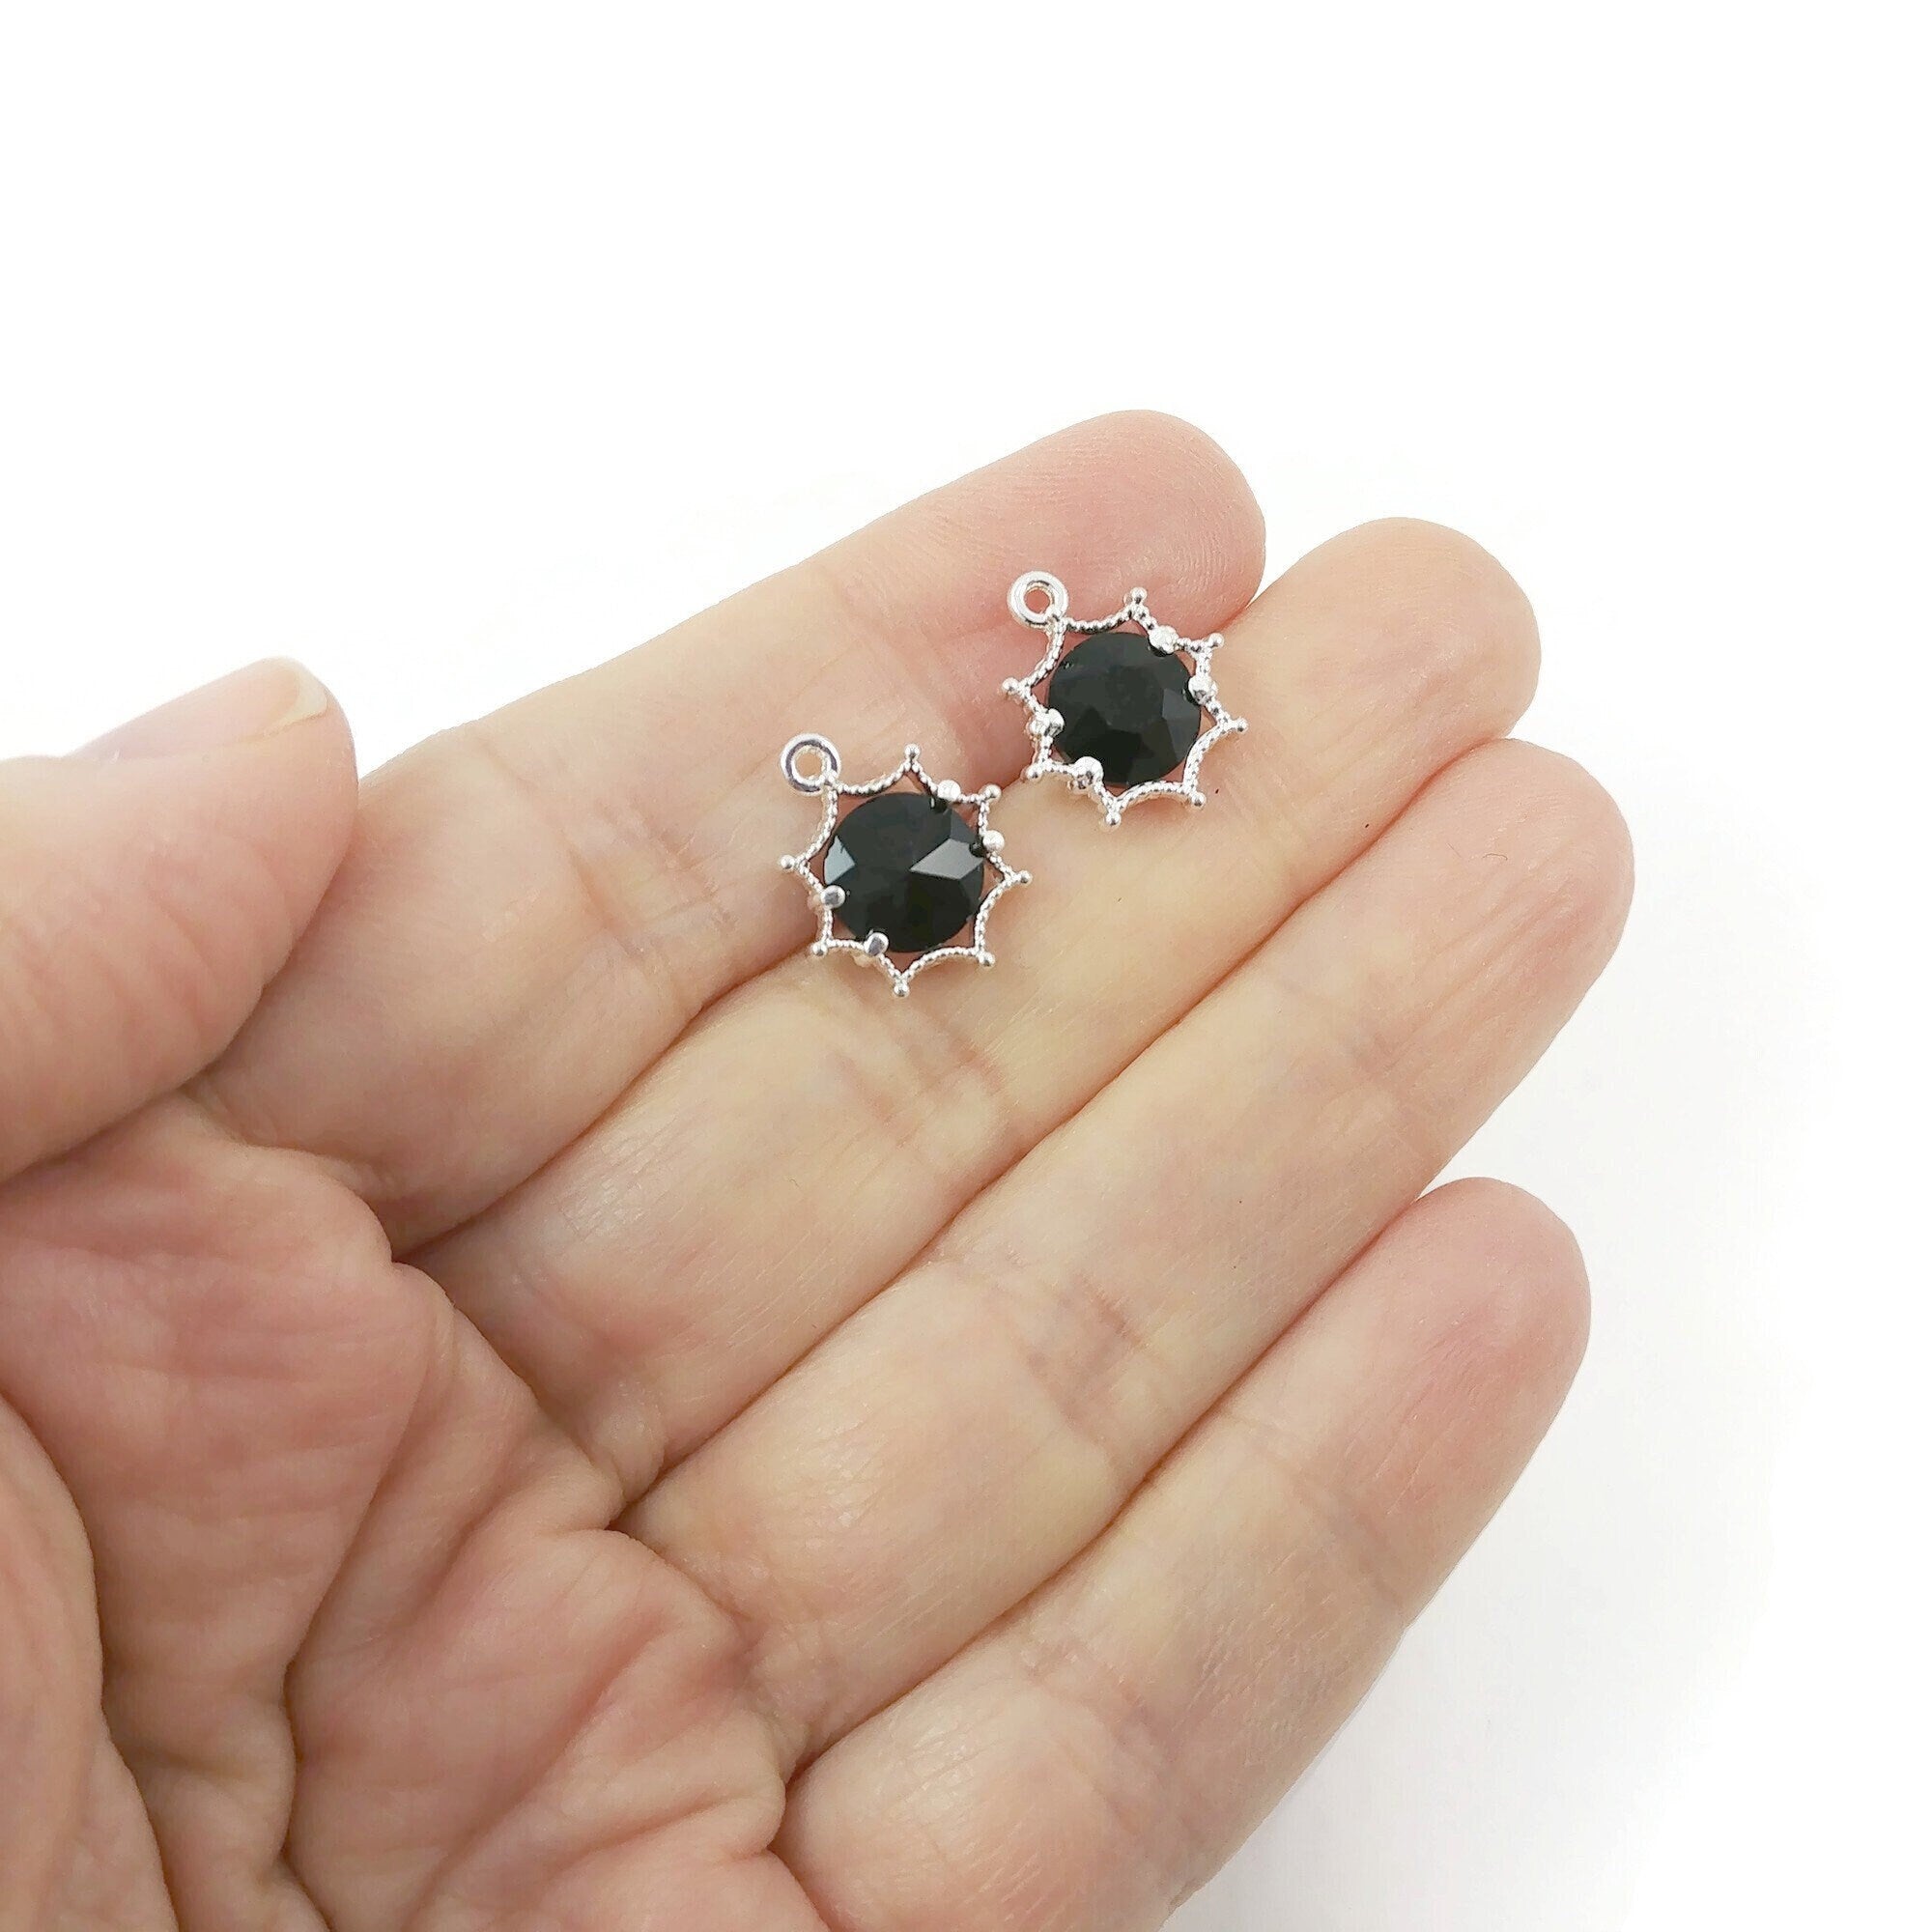 Tiny black crystal charms, 15mm nickel free pendant for jewelry making